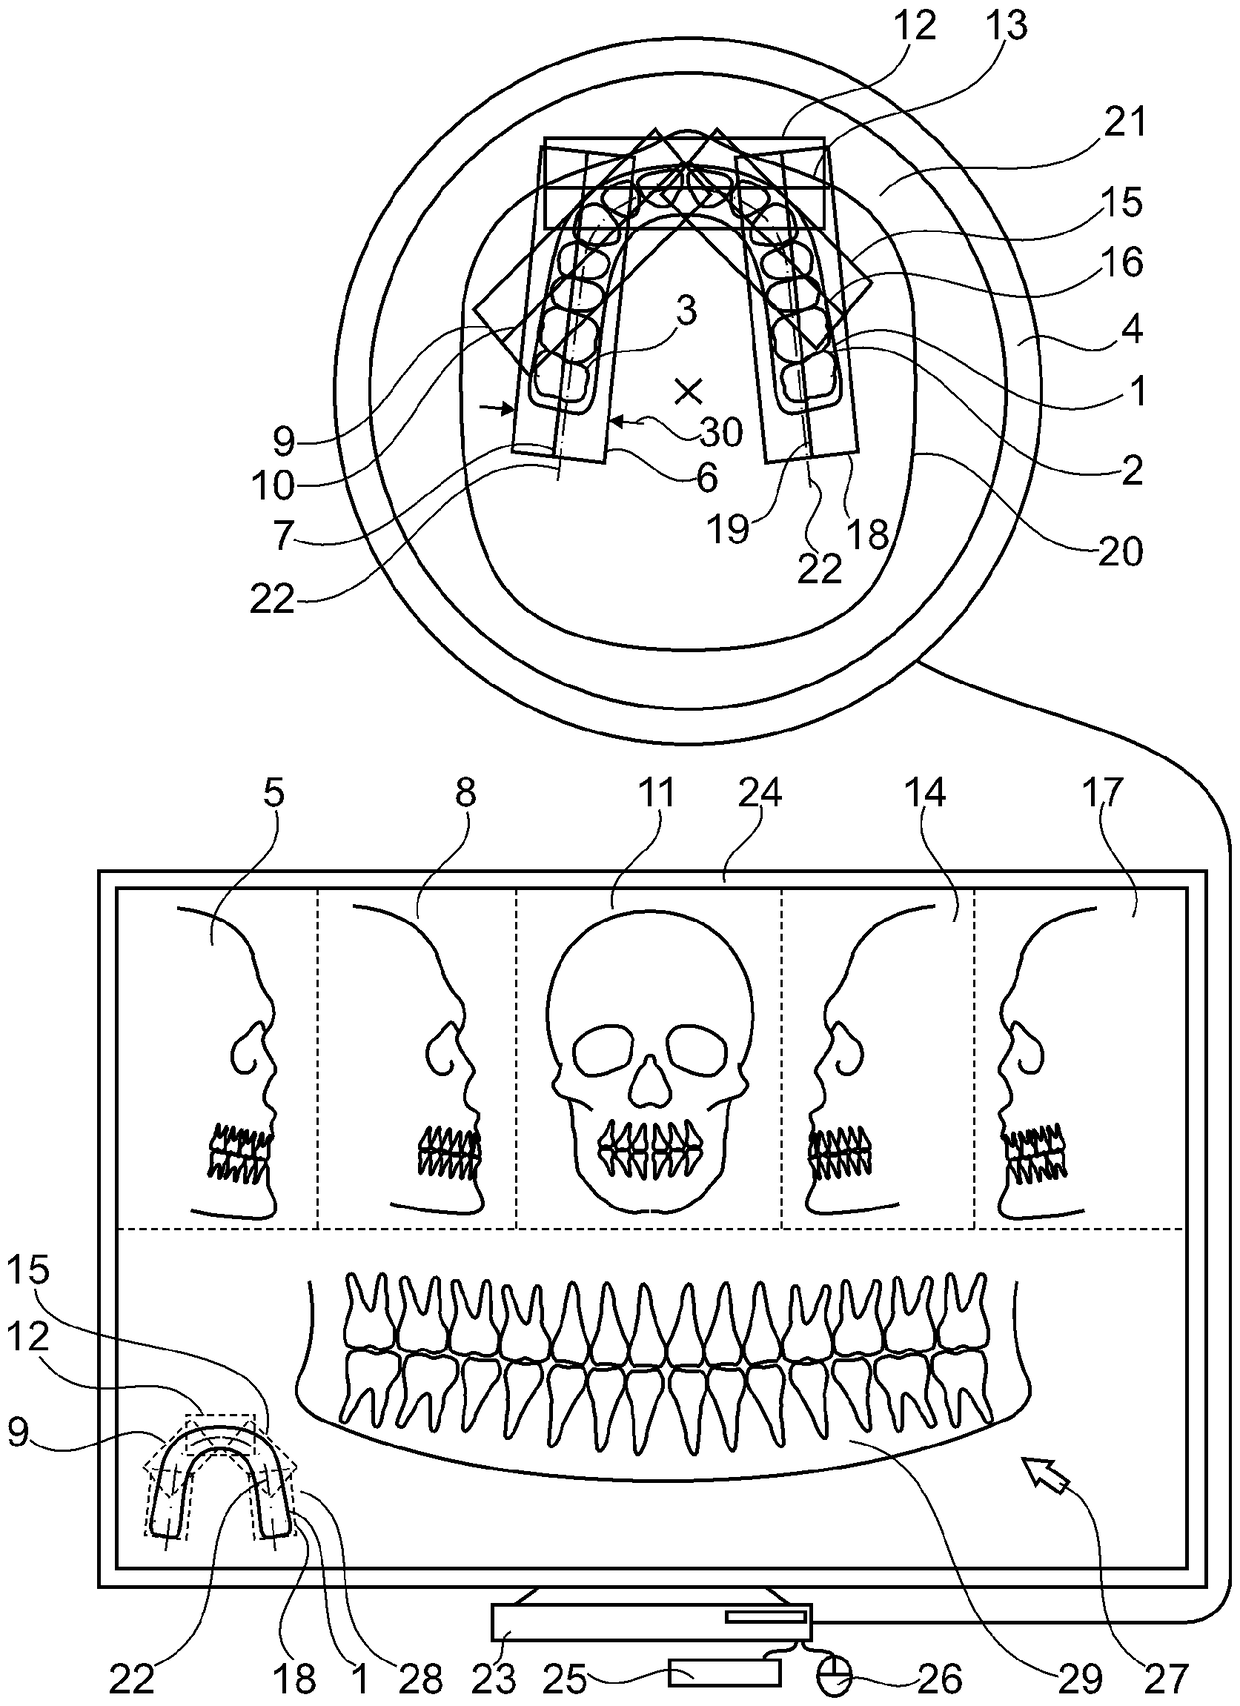 Method for detecting a dental object